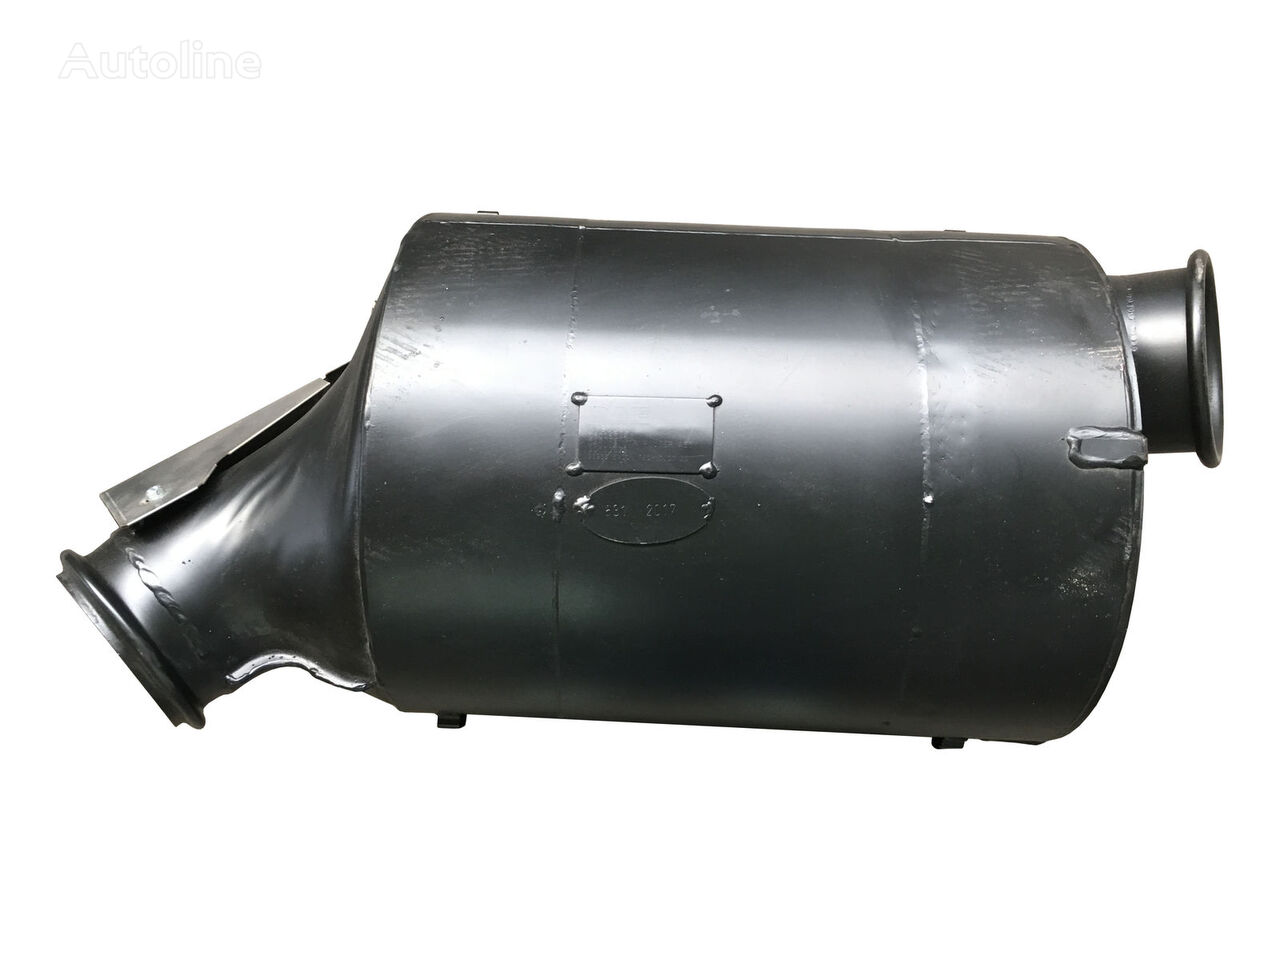 catalyseur DAF Euro 5 1790080 pour camion DAF XF95, XF105, CF85